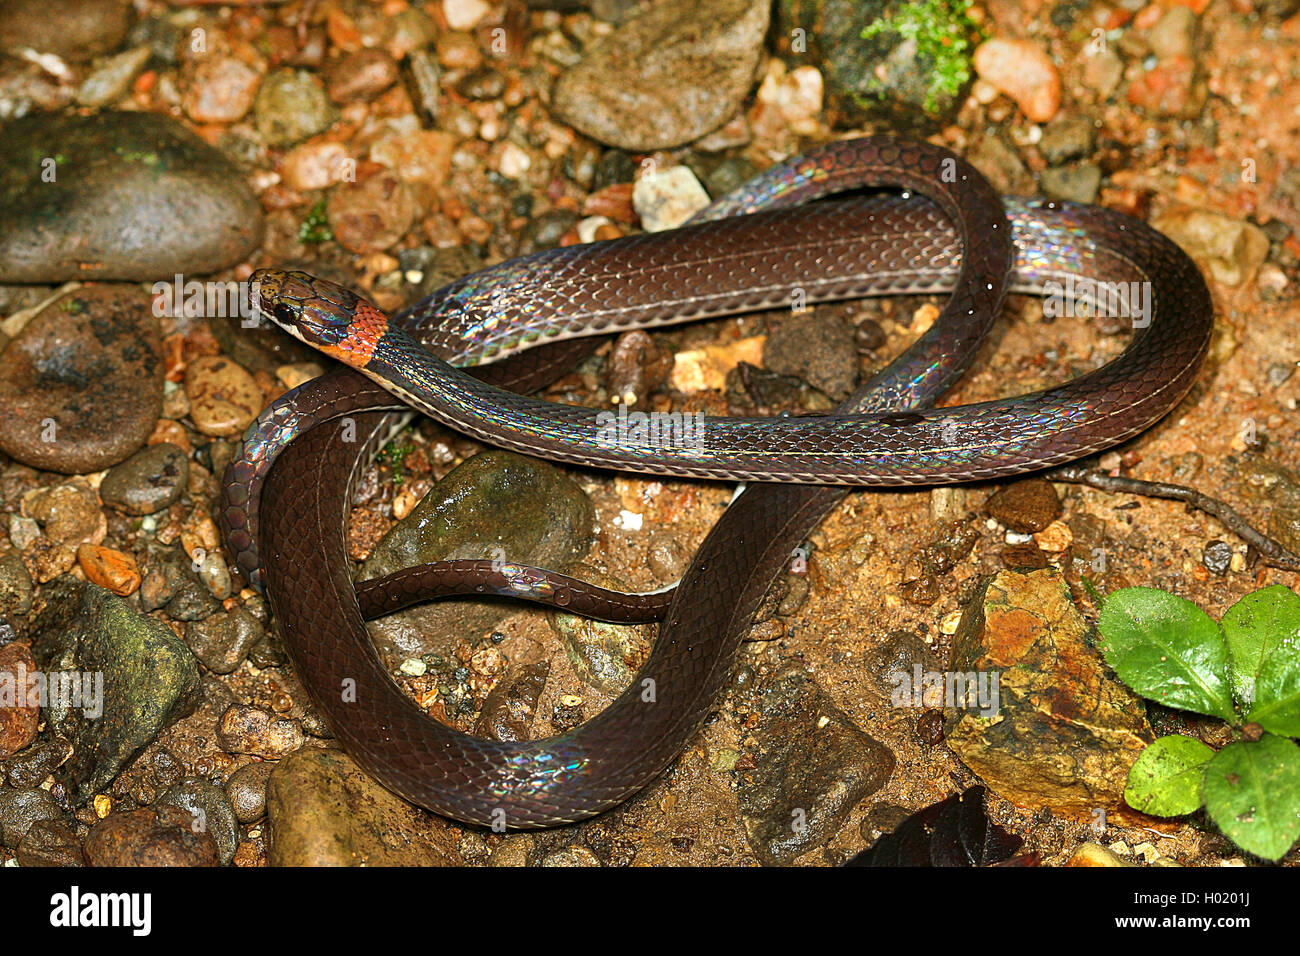 Tawny-headed Litter Snake  (Urotheca fulviceps), rolled-up on the ground, Costa Rica Stock Photo